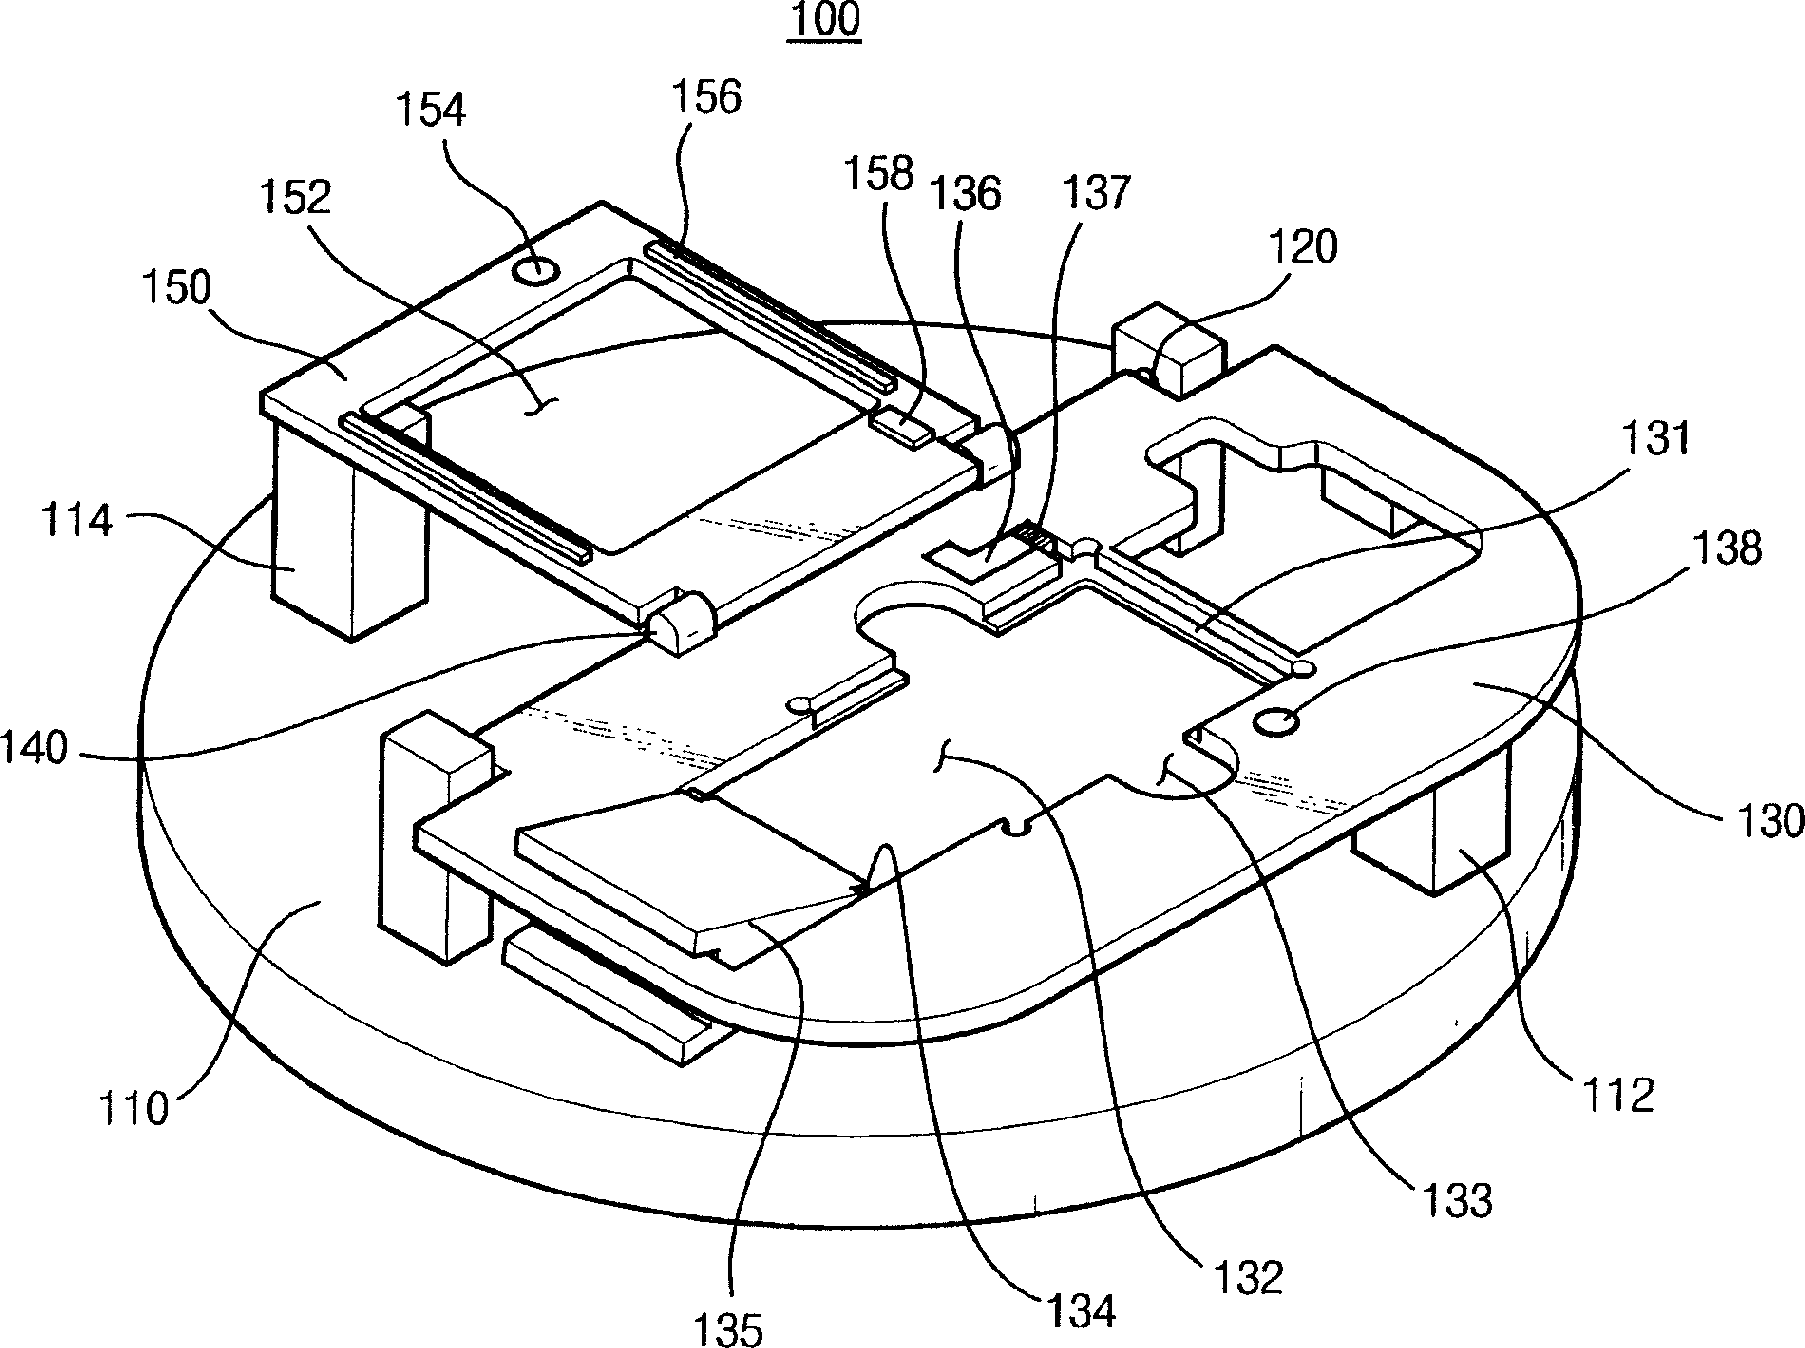 Jig and method of manufacturing a display device using the same